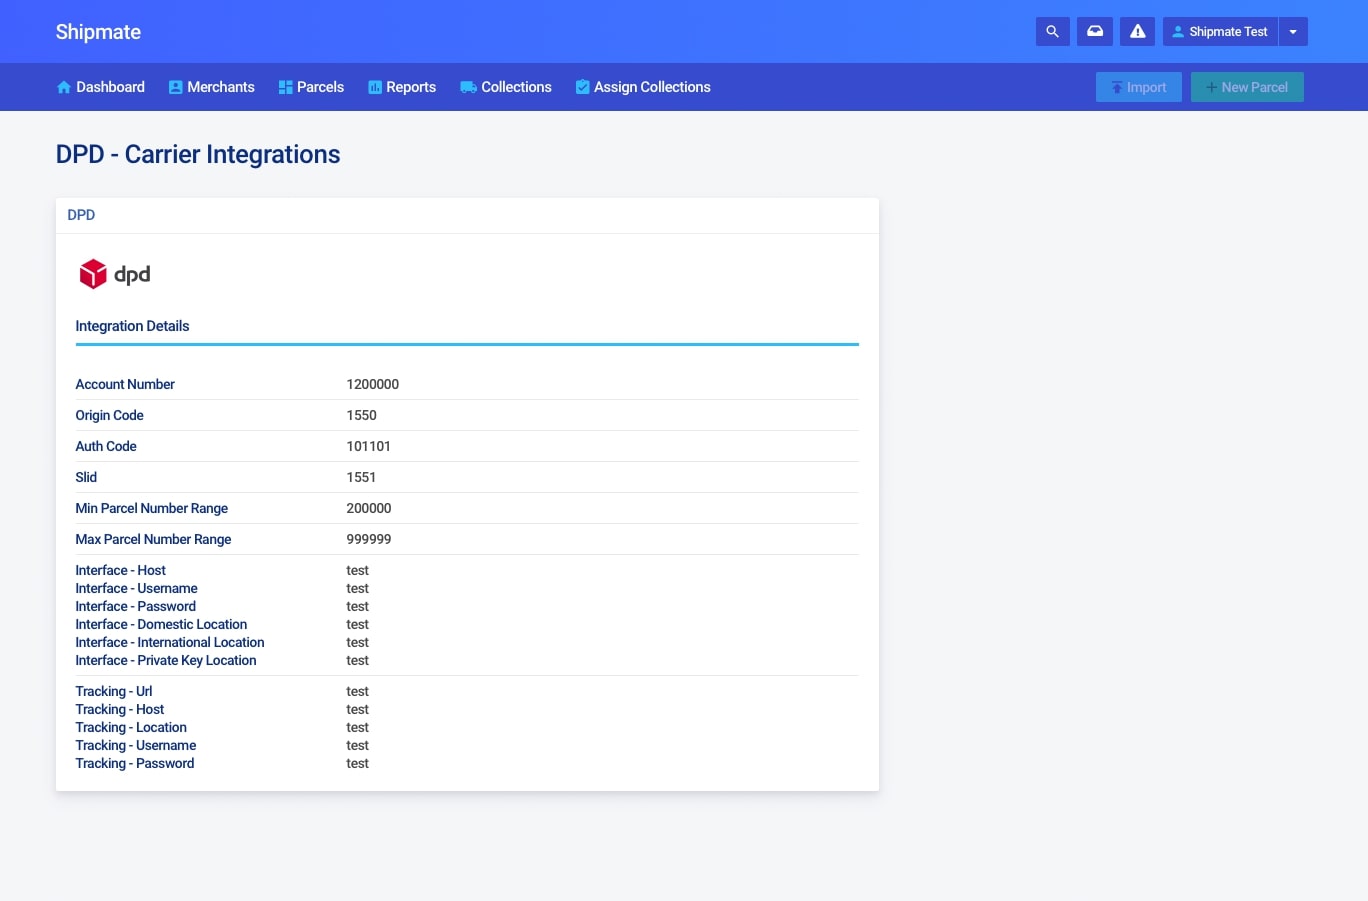 Shipmate - Your Account - Viewing Carrier Configurations